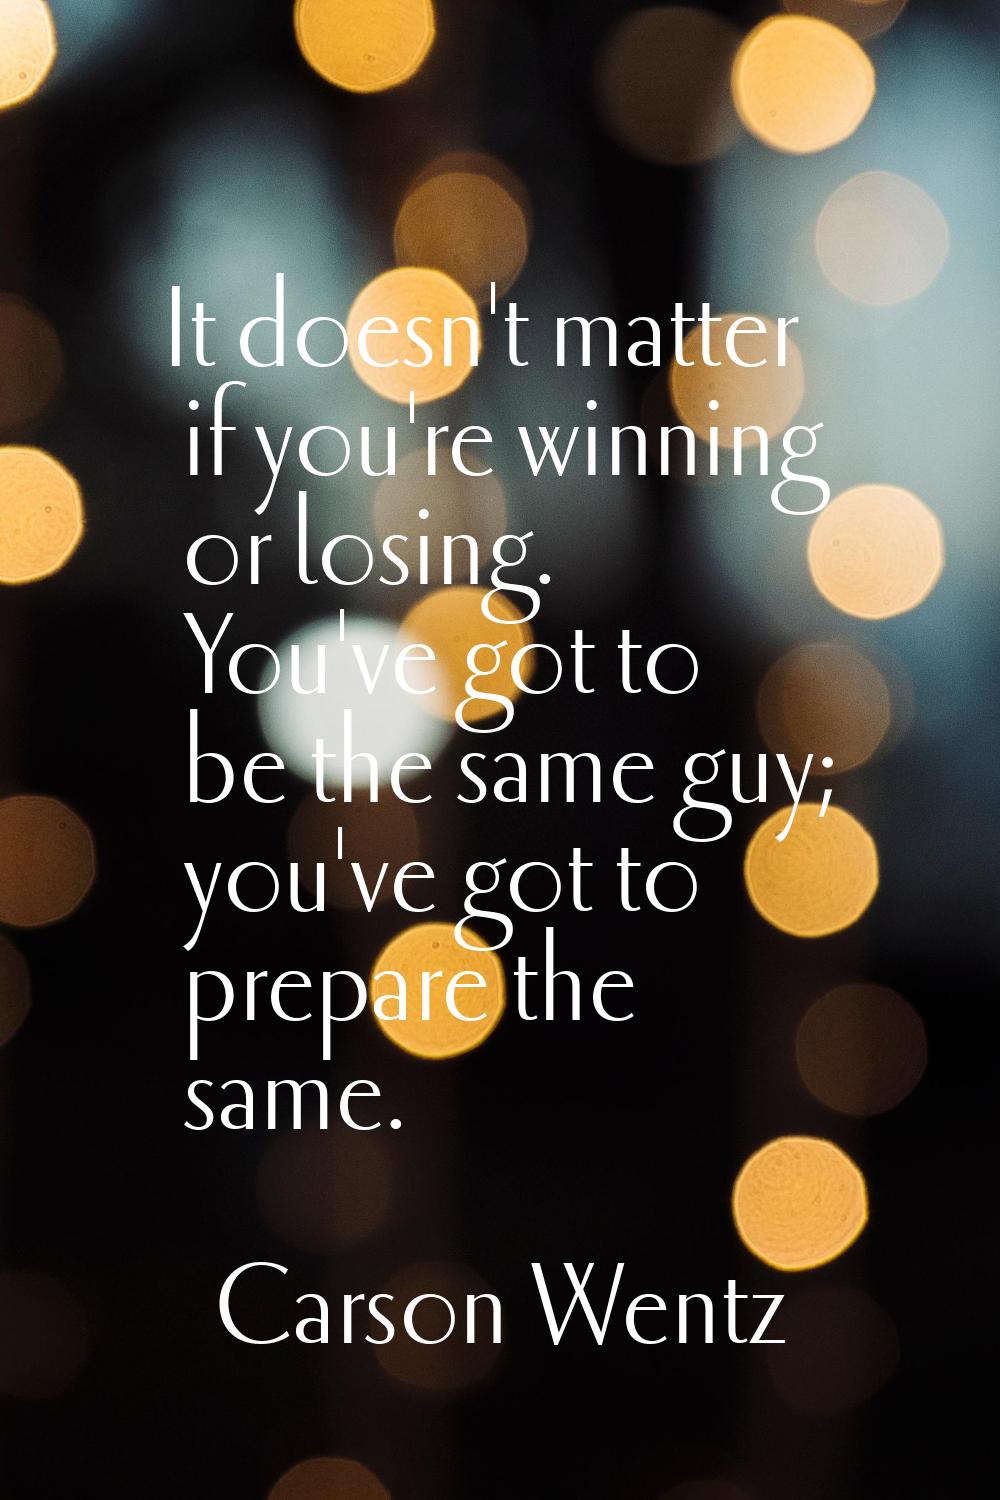 It doesn't matter if you're winning or losing. You've got to be the same guy; you've got to prepare